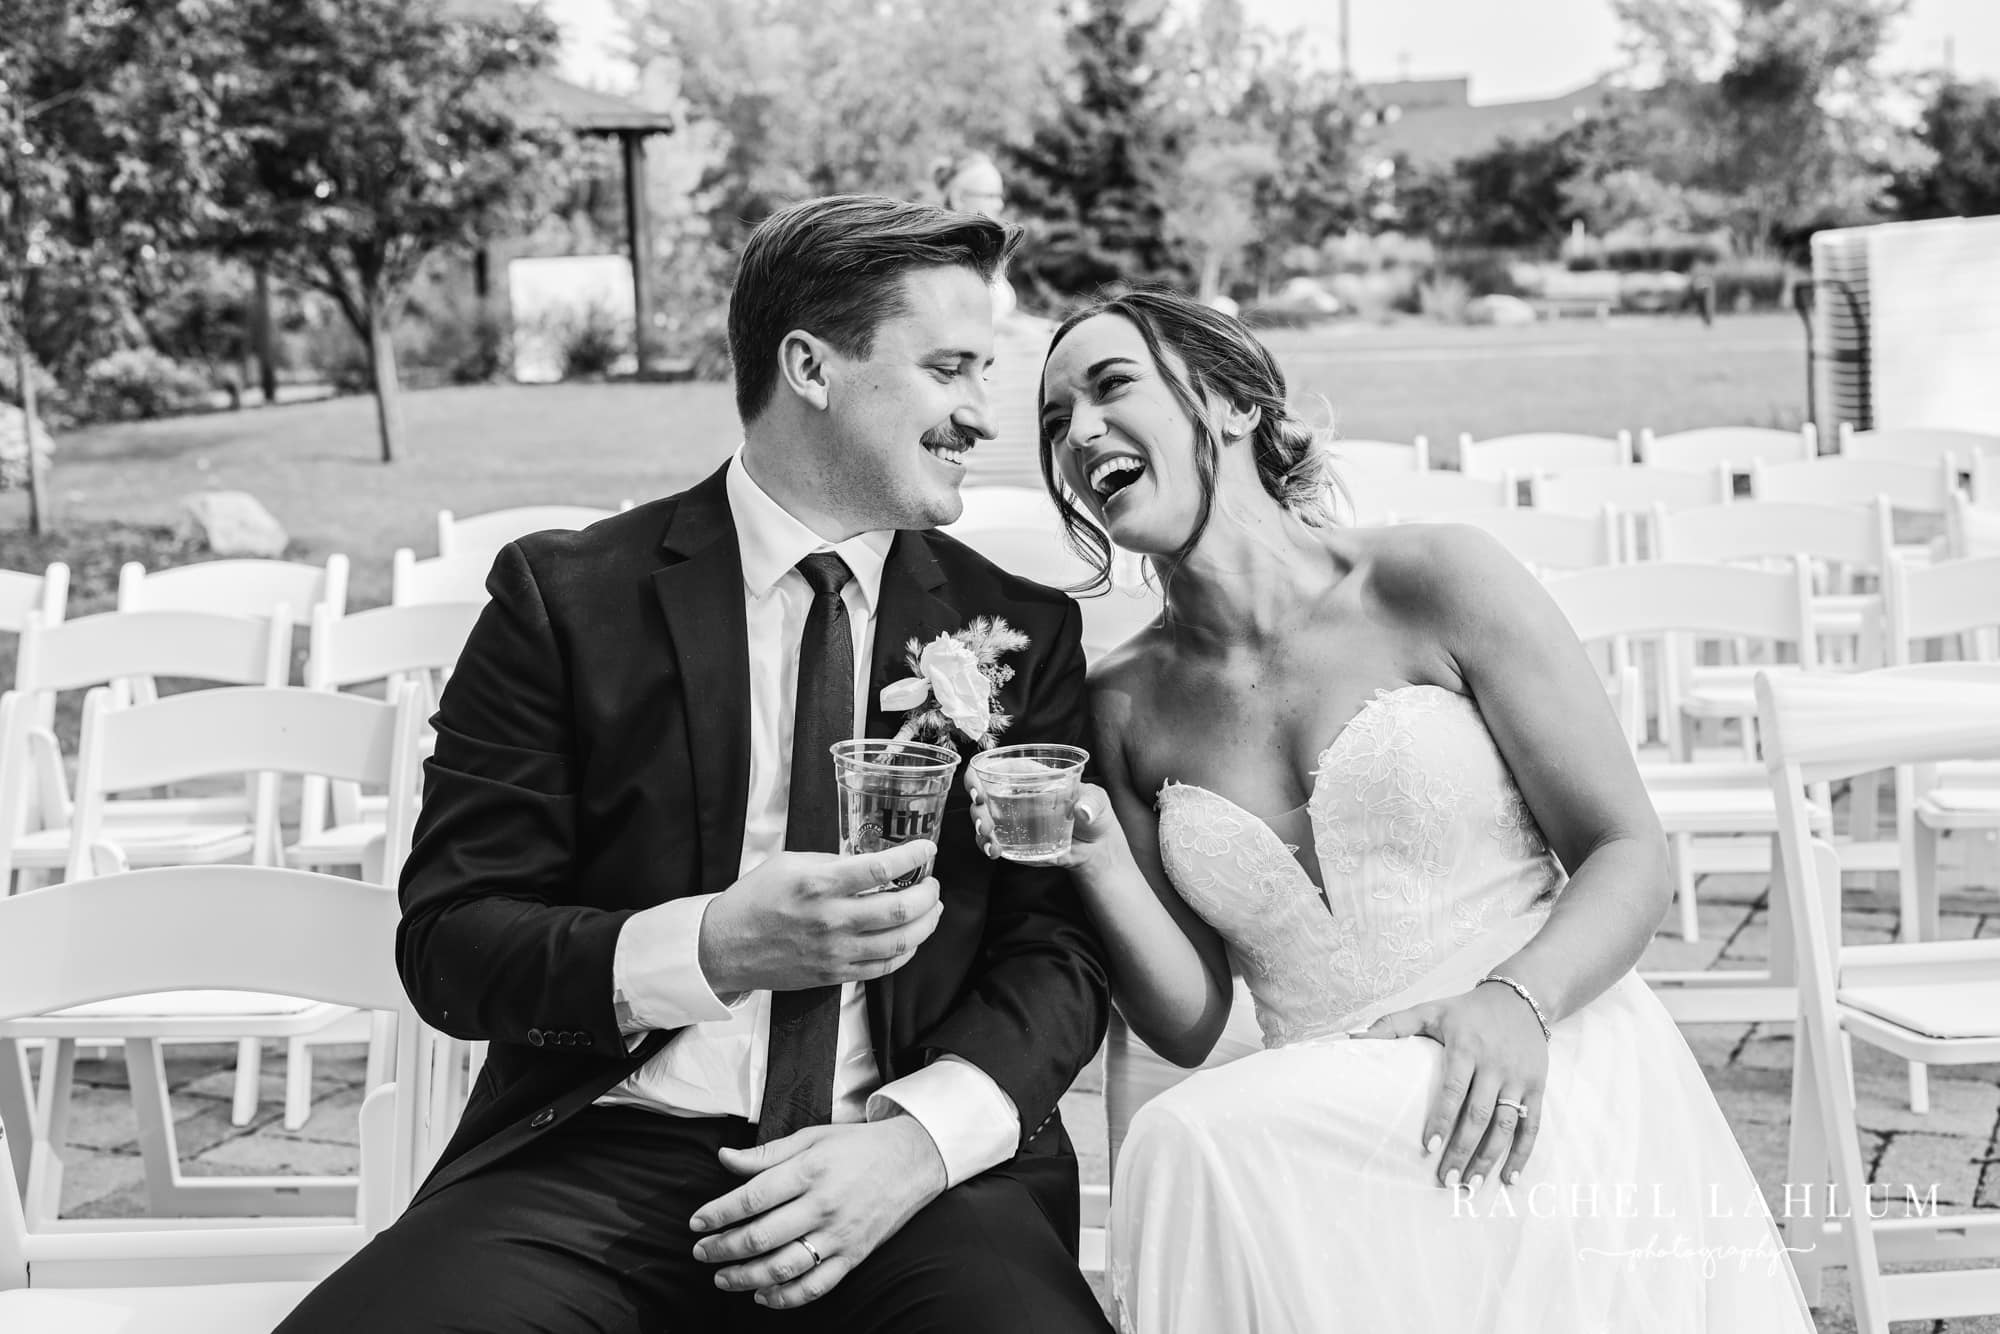 Bride and groom laugh while toasting for a wedding photo at their wedding reception at the Boathouse in Alexandria, Minnesota.